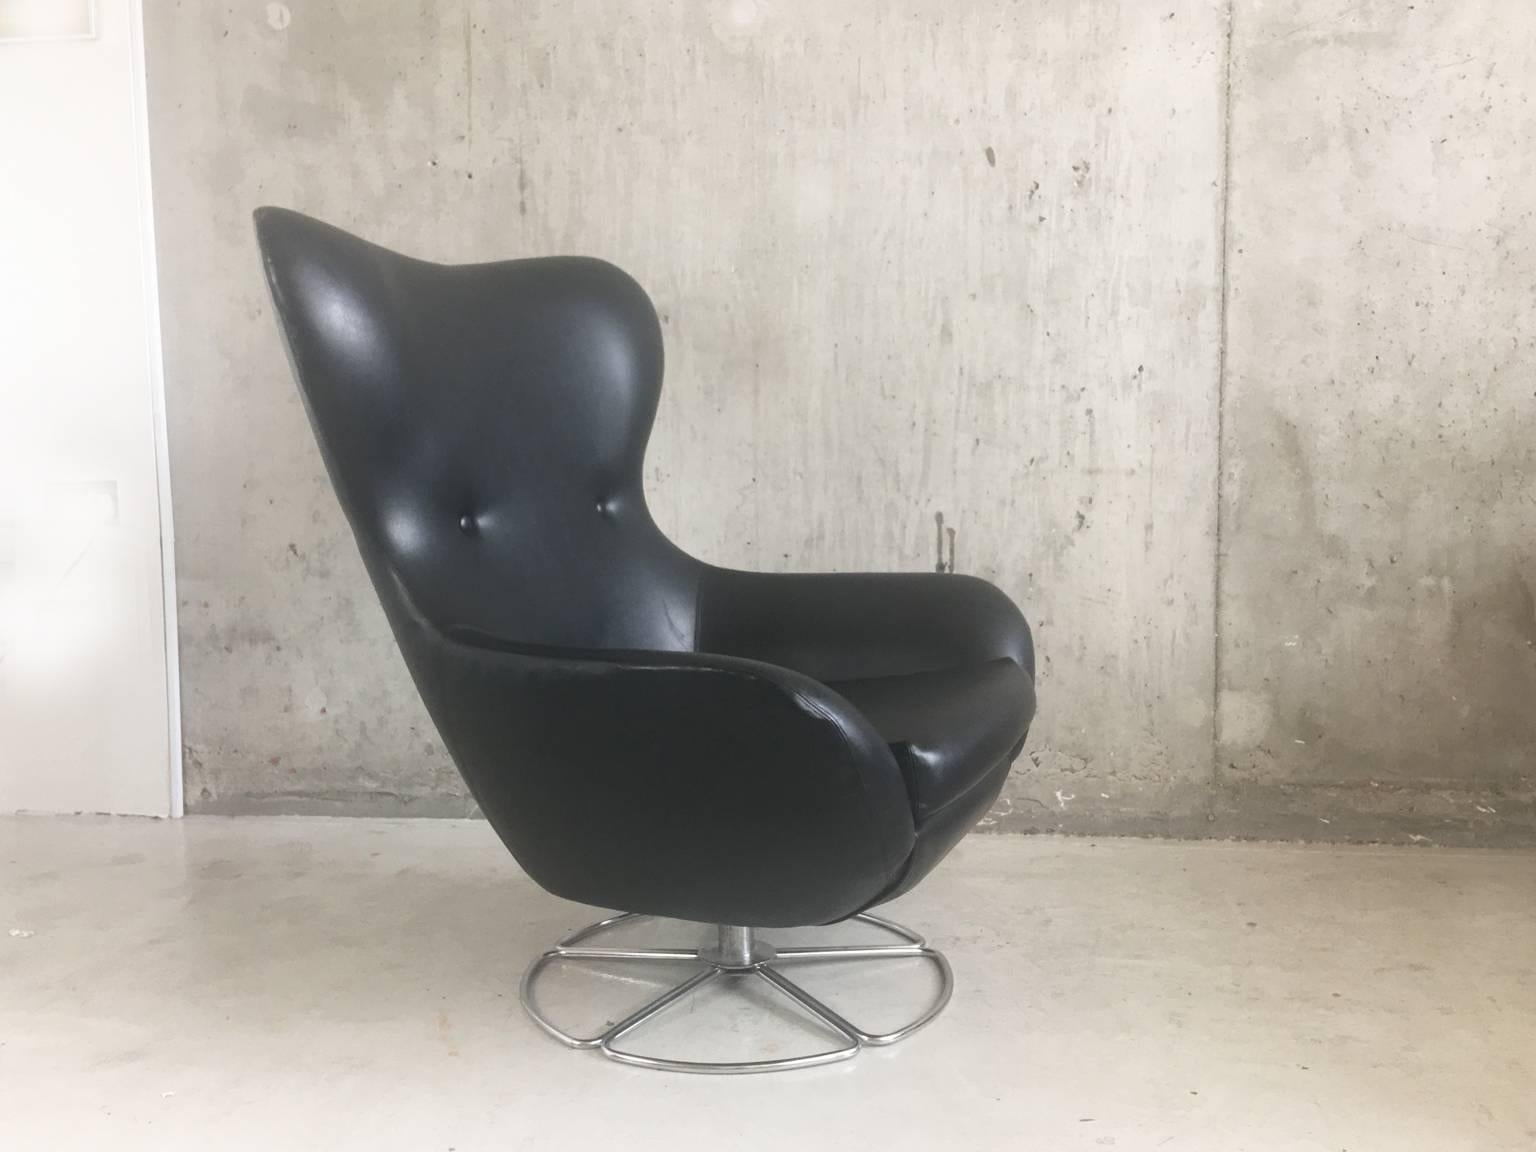 This is very large beautifully curved armchair, upholstered in the original thick black textured vinyl. It’s in fantastic condition and very, very comfortable.